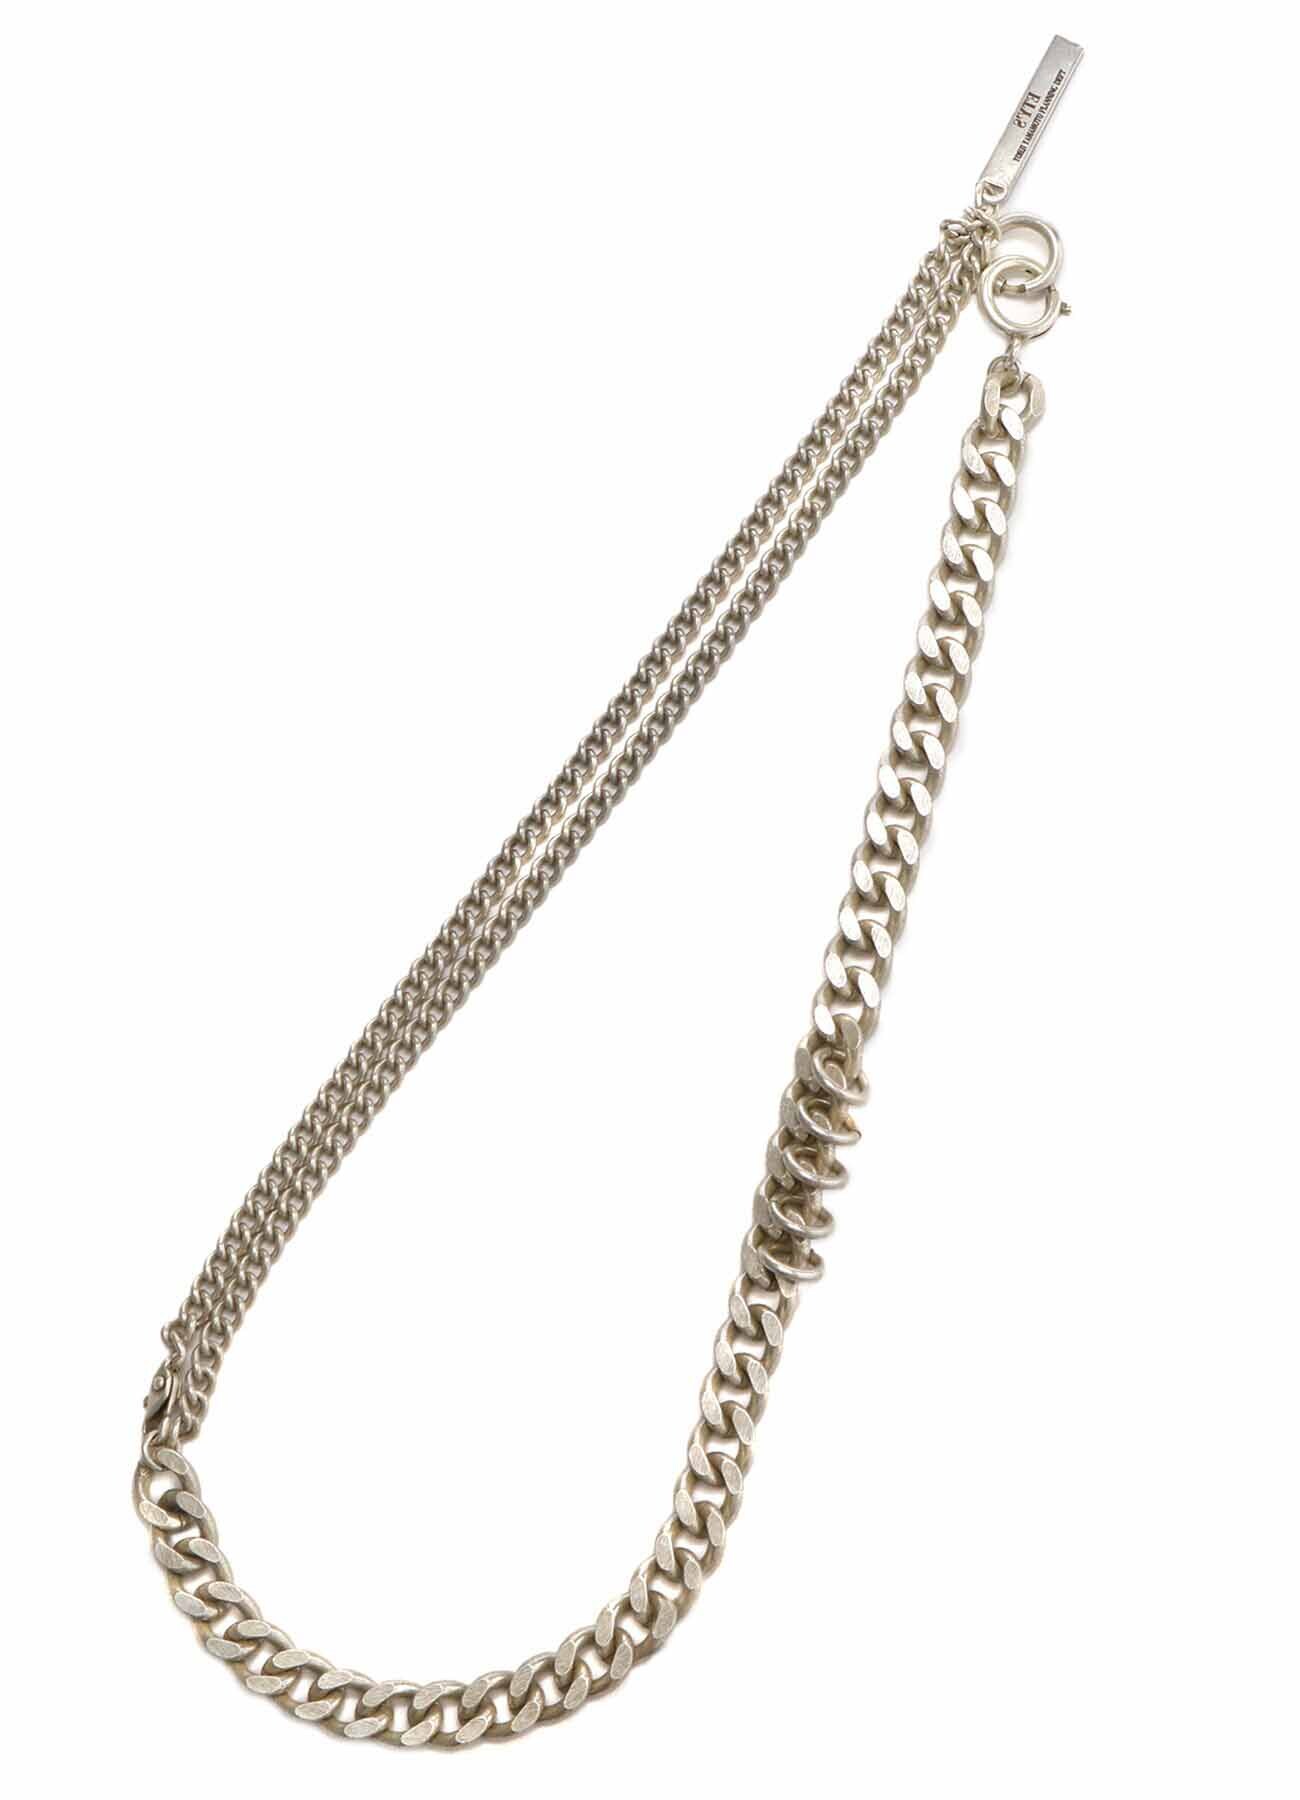 6-WAY CURVED CHAIN BRACELET NECKLACE(FREE SIZE Antique Silver): S